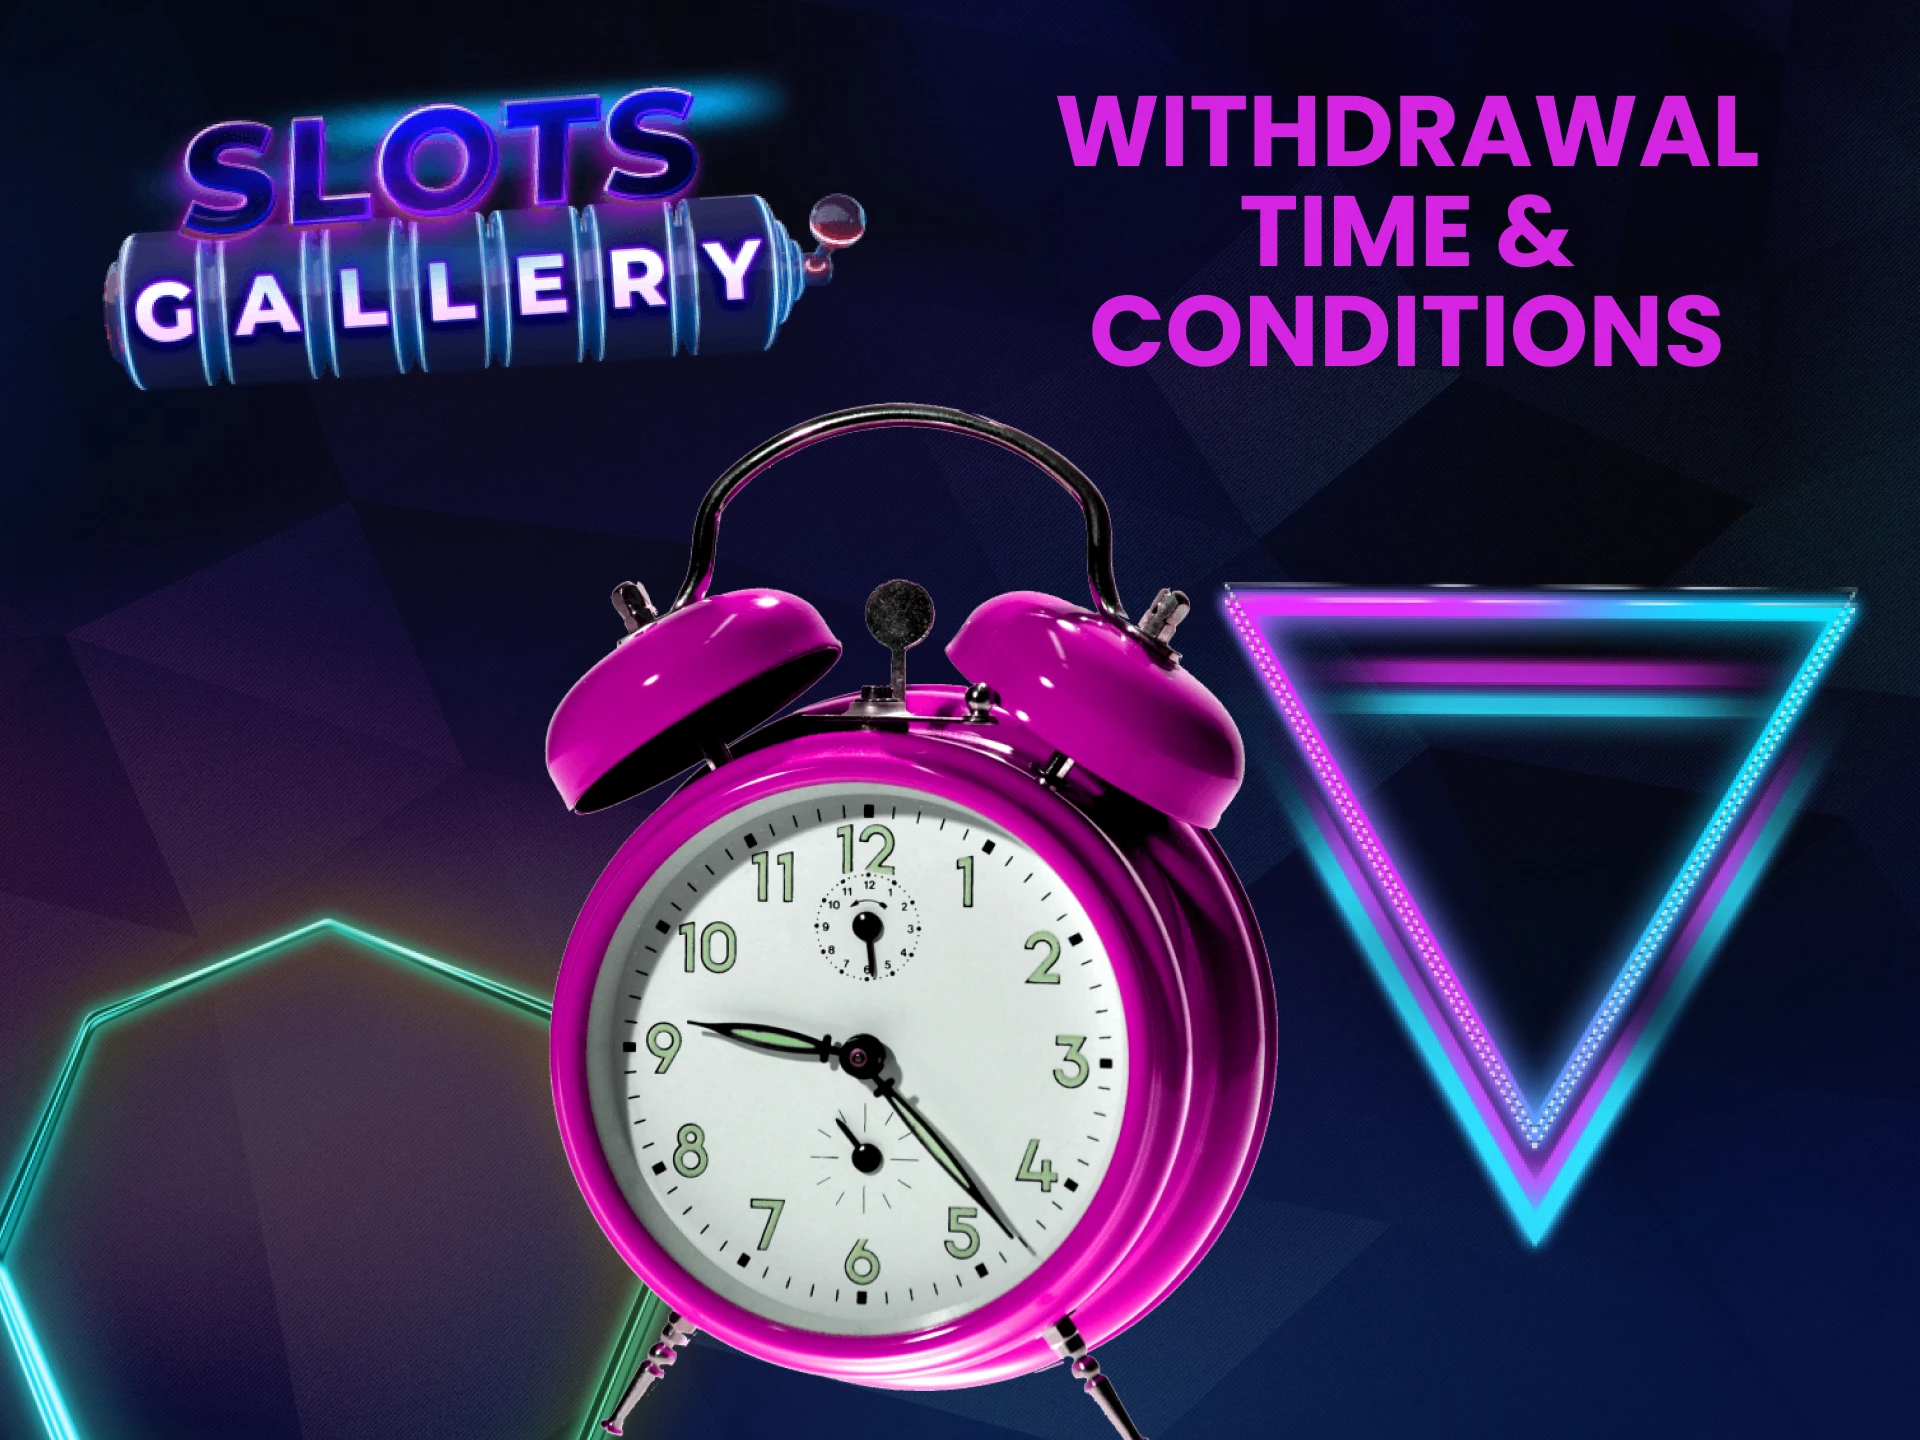 We will tell you how long it takes to withdraw funds to Slots Gallery.